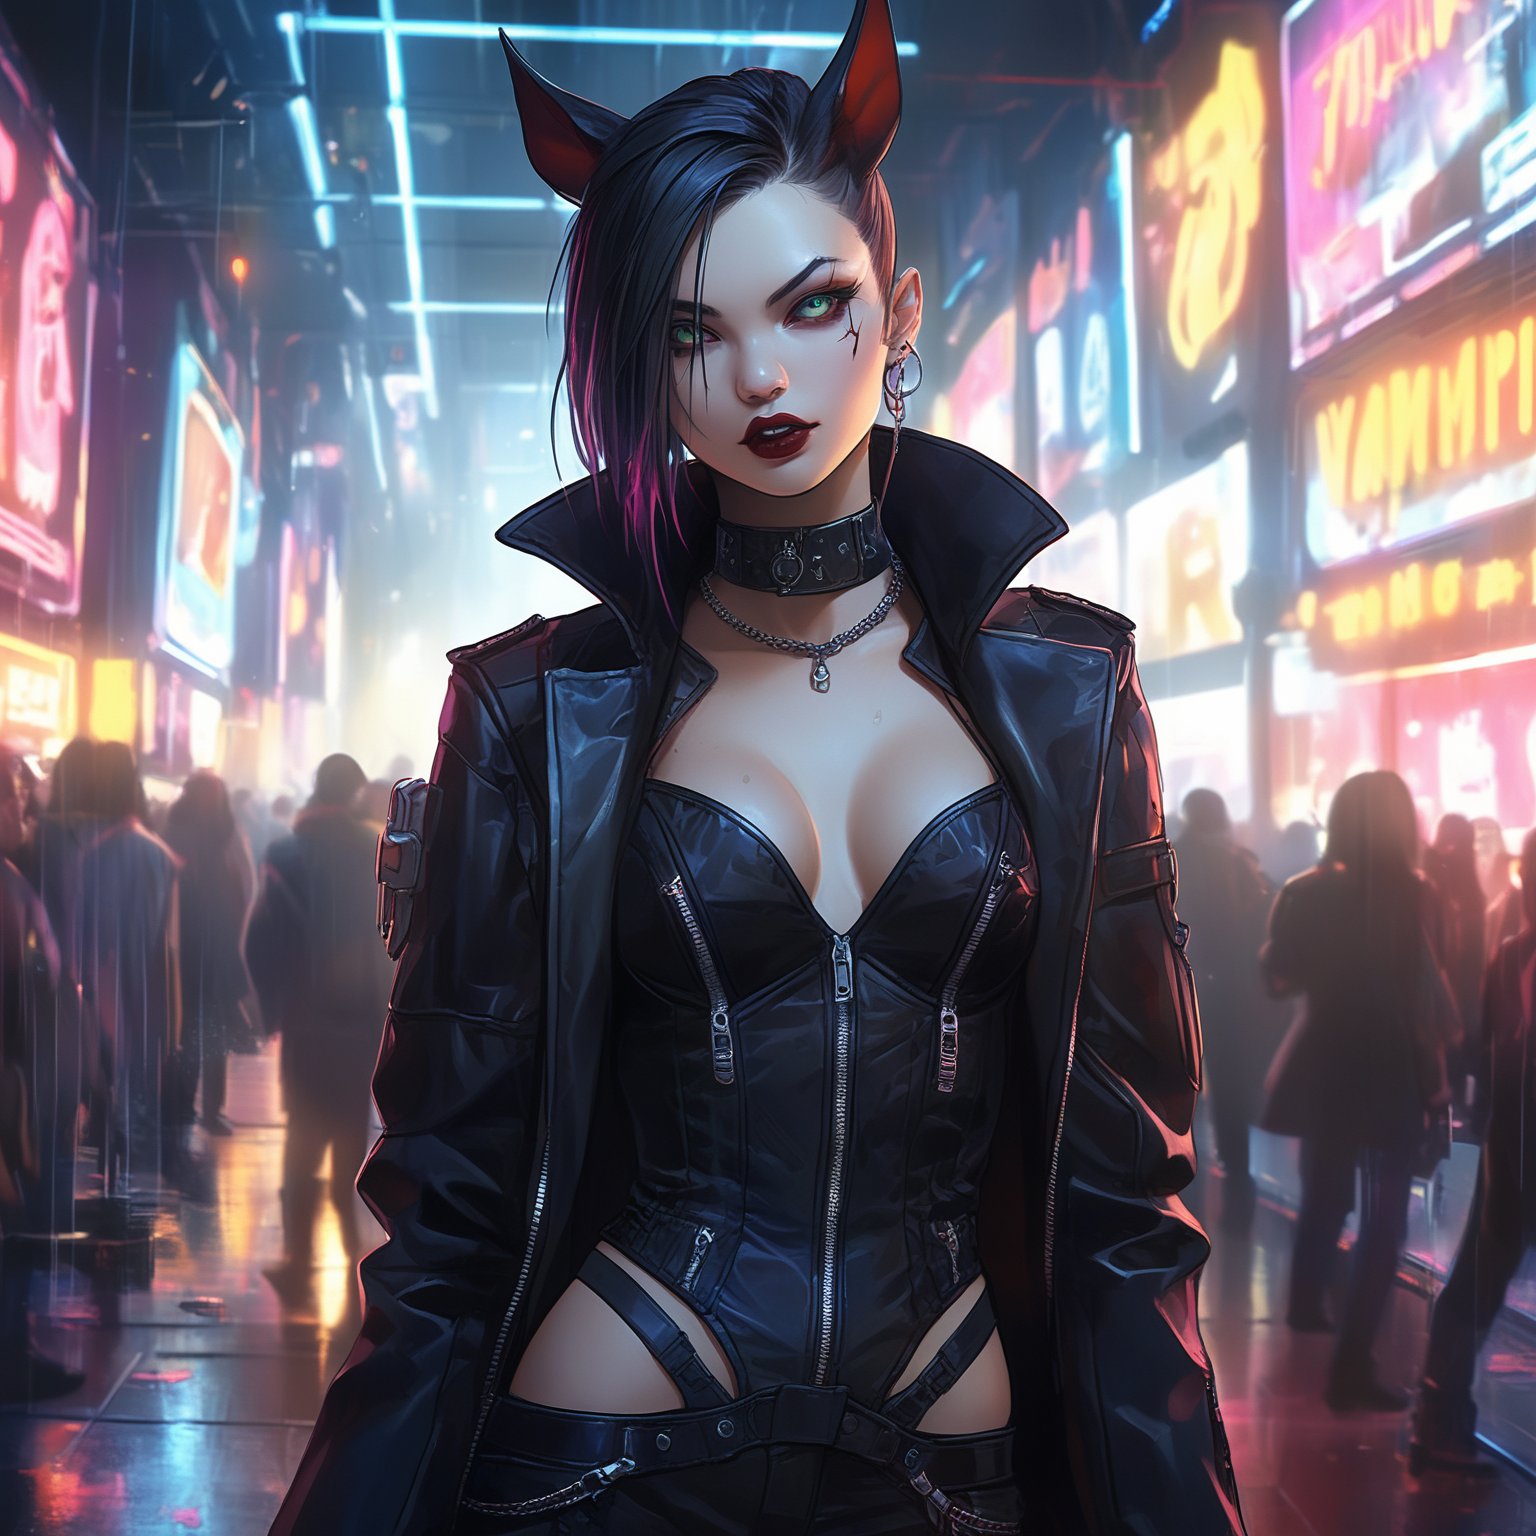 (beat quality, masterpiece), (8K, HDR), 
Cyber Bloodlust:
"Generate an image of a vampire in a bustling cyberpunk nightclub, surrounded by neon lights and digital screens. The vampire's eyes gleam with hunger, and their outfit is a mix of gothic and futuristic styles, blending seamlessly with the high-tech environment."
dark, vibrant, gothic,